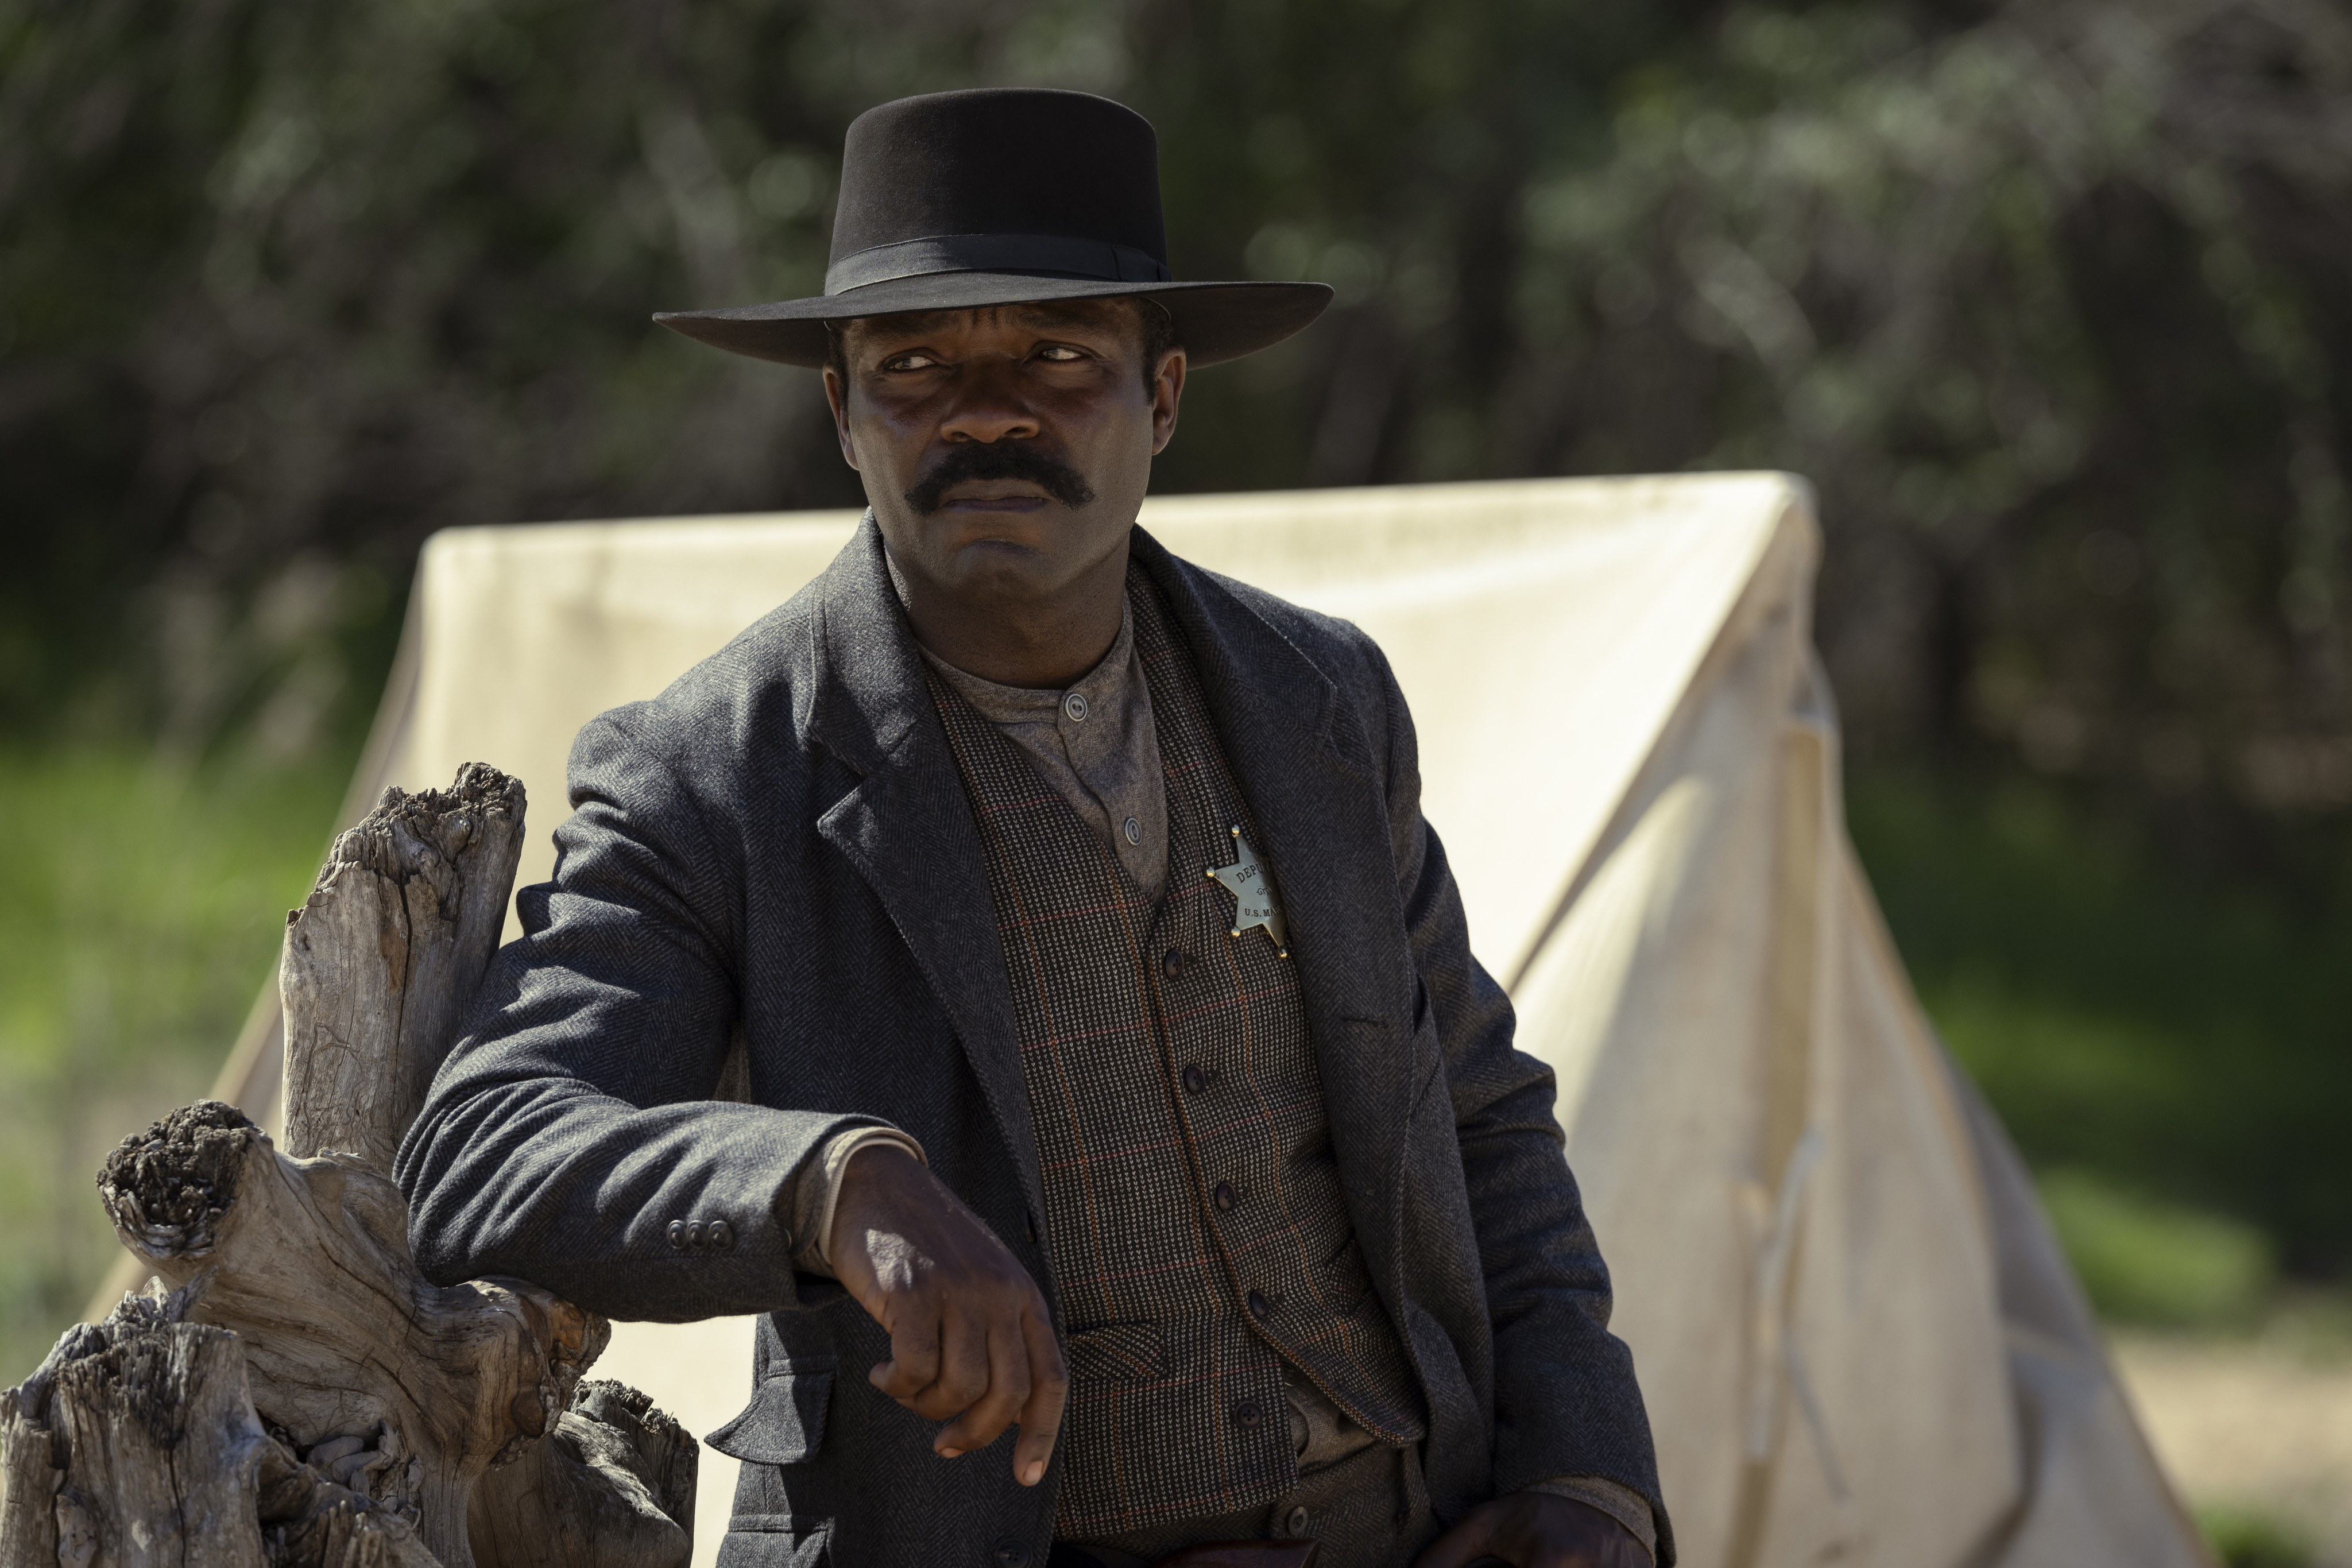 America's Fascination With the Western Genre Tells Us Who We Are